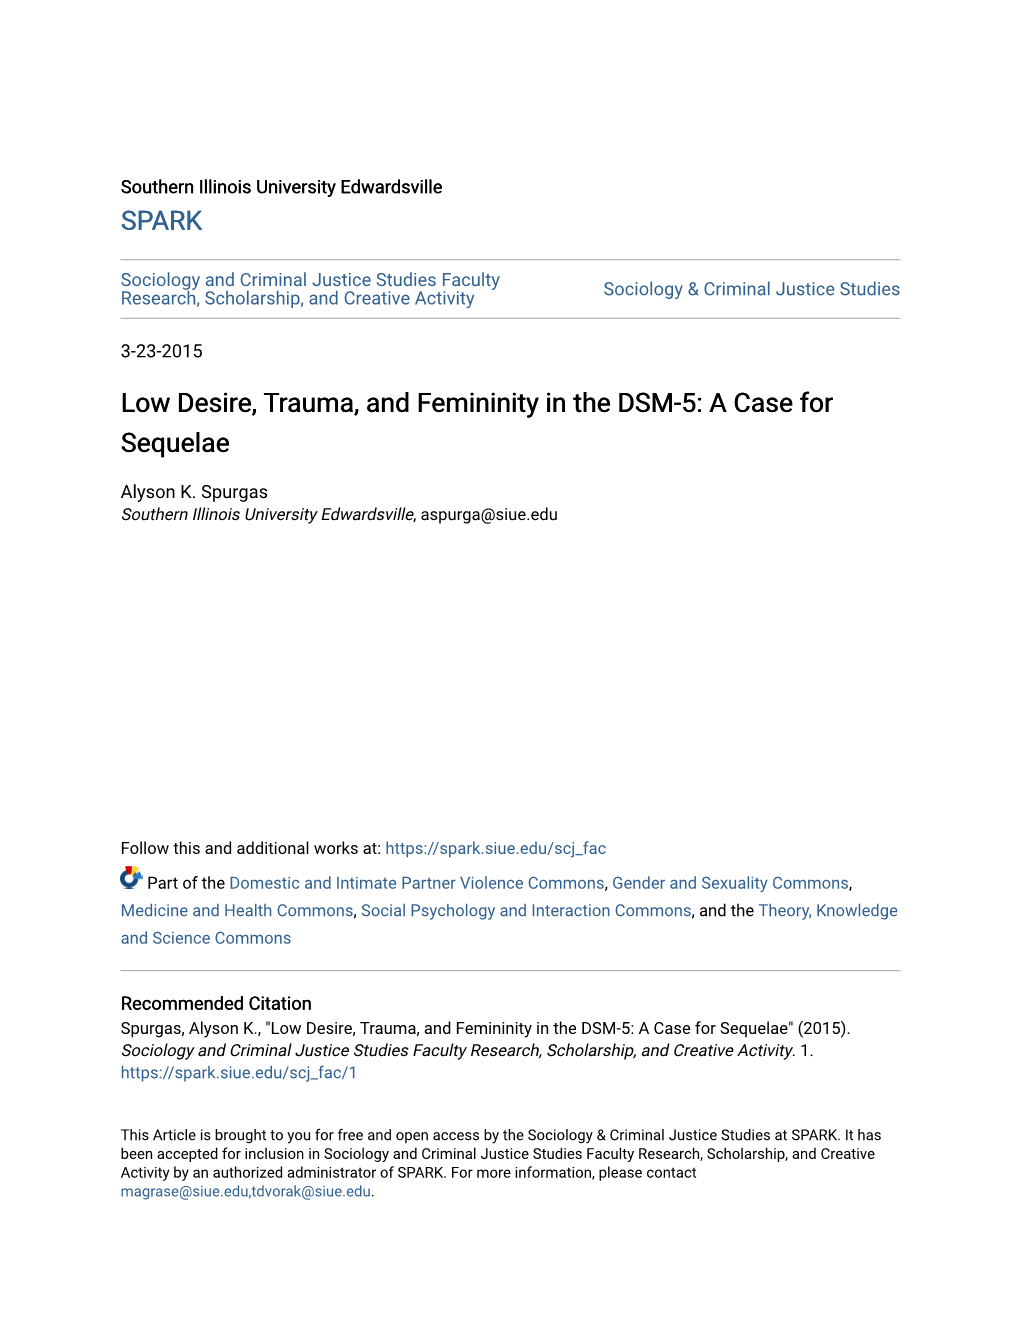 Low Desire, Trauma, and Femininity in the DSM-5: a Case for Sequelae